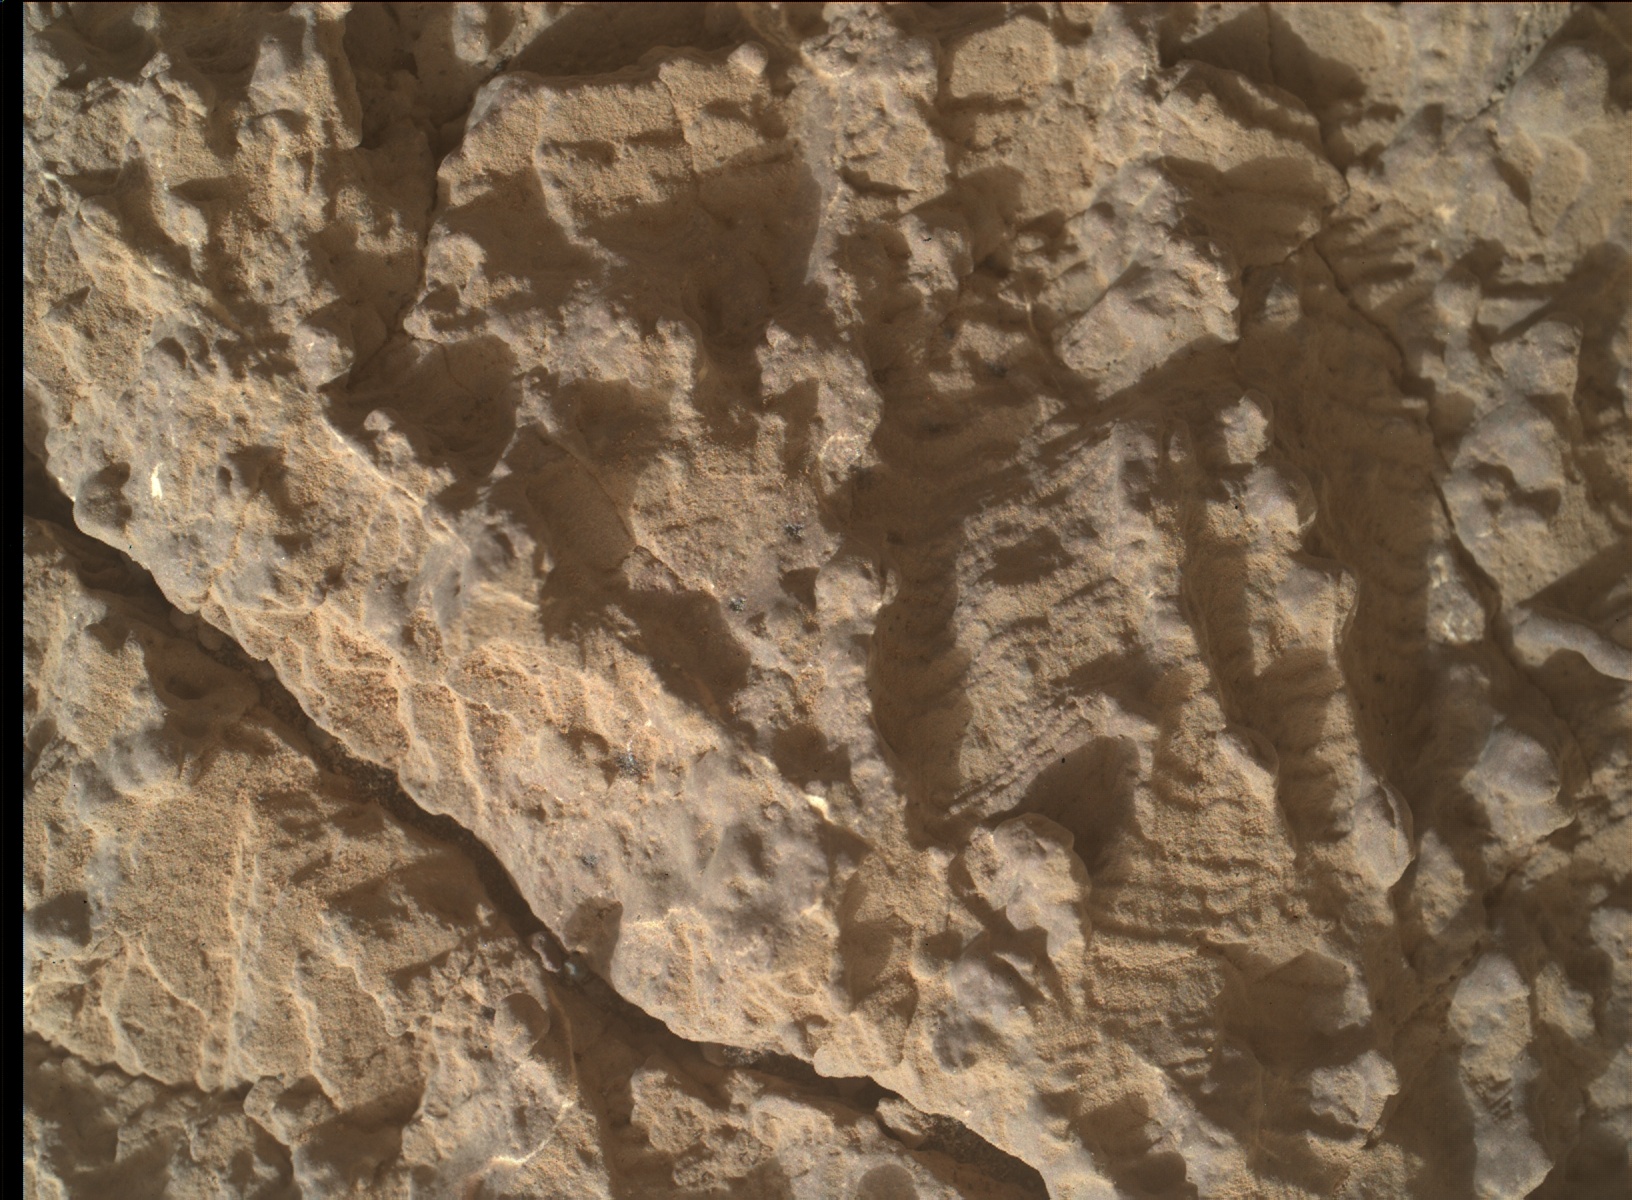 Nasa's Mars rover Curiosity acquired this image using its Mars Hand Lens Imager (MAHLI) on Sol 2450